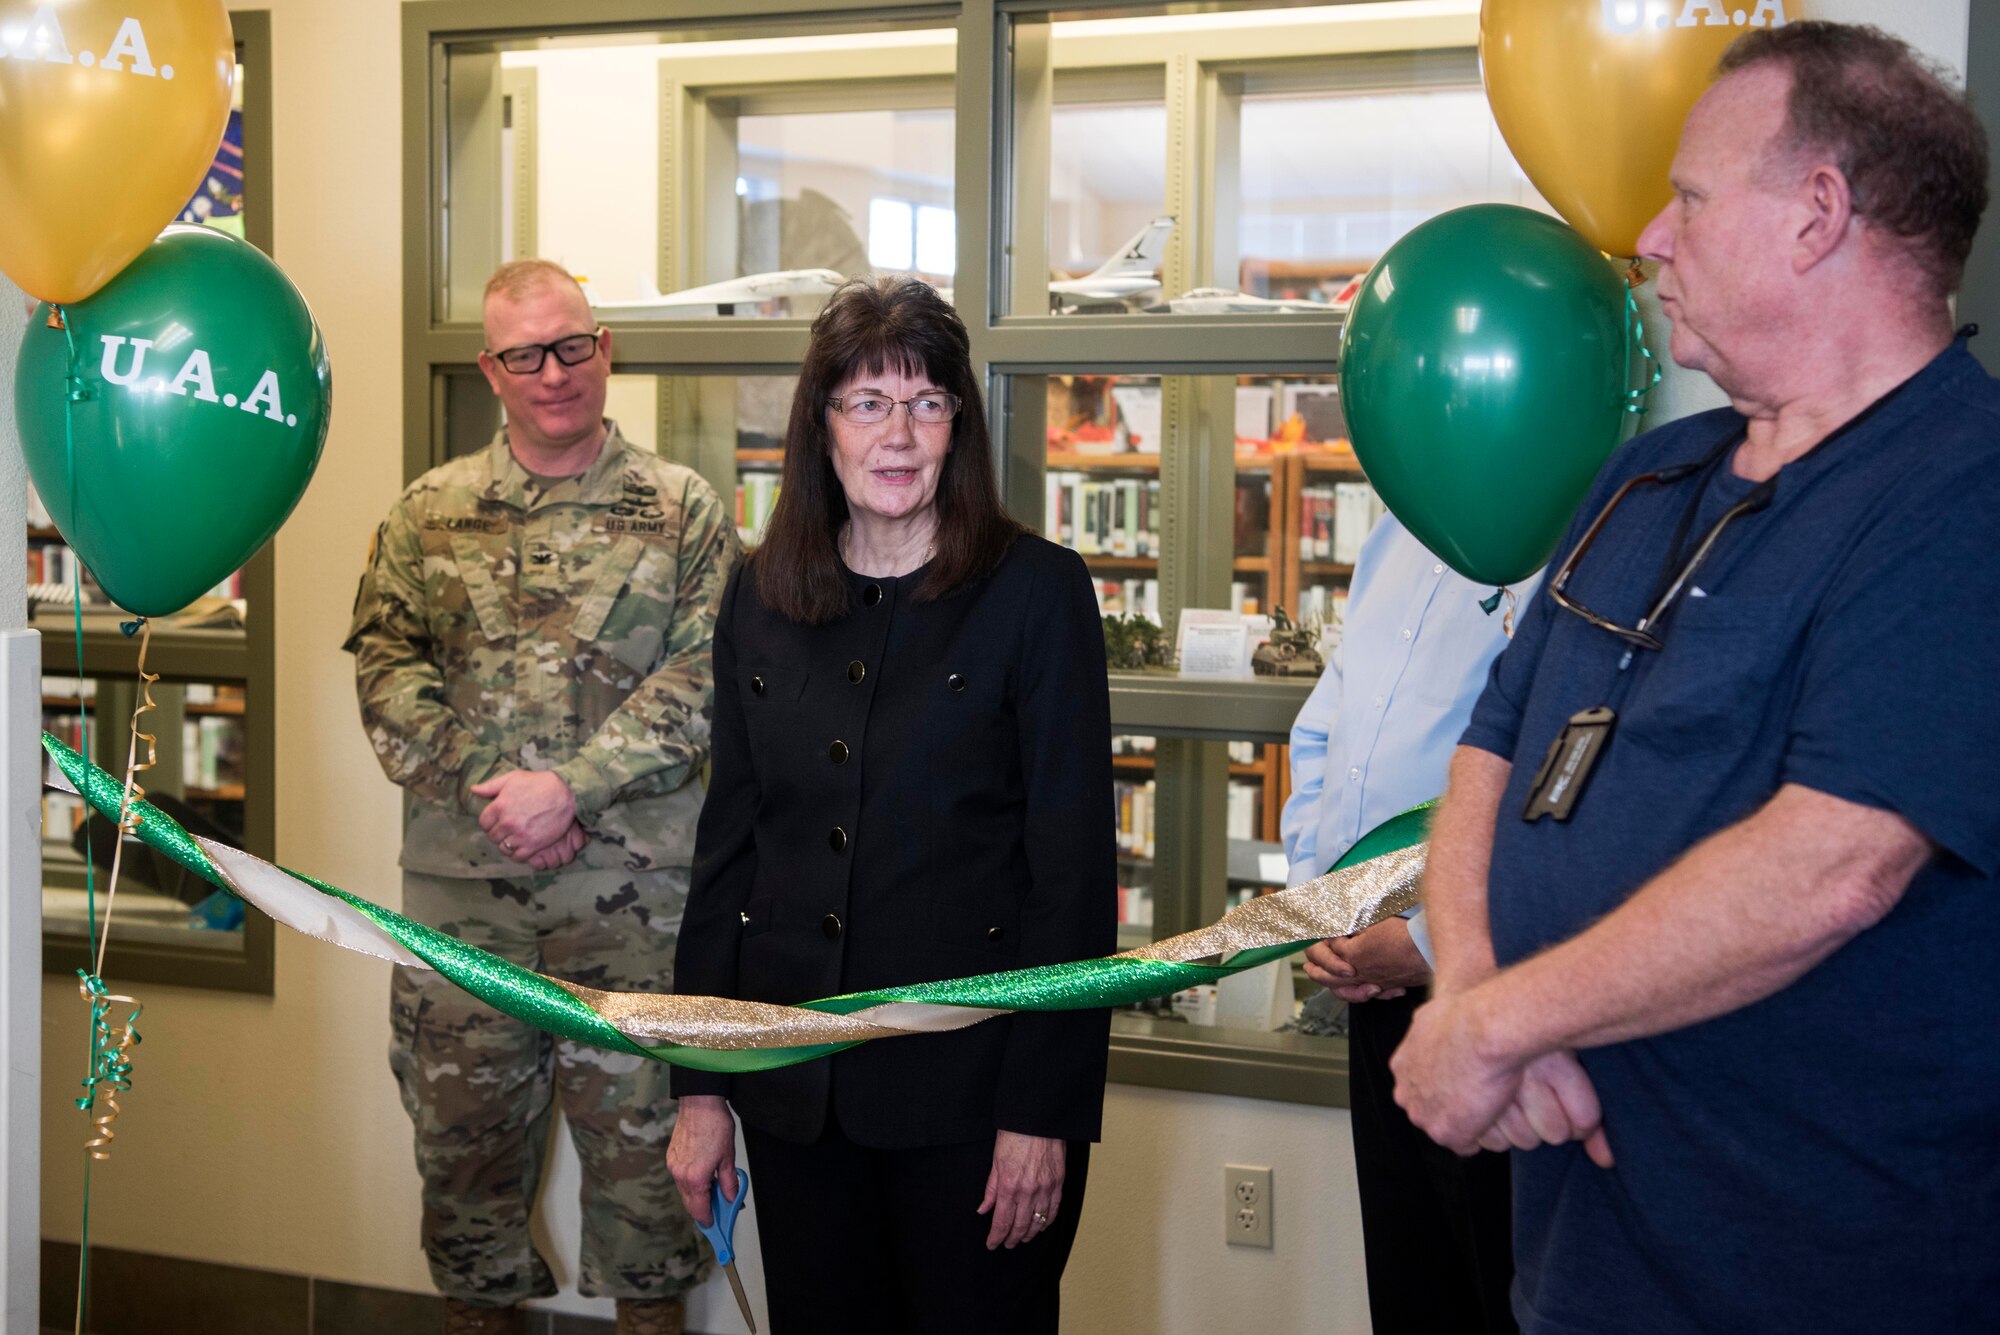 Renee Carter-Chapman, University of Alaska Anchorage (UAA) senior vice provost, gives a speech during a ribbon-cutting ceremony at the Joint Base Elmendorf-Richardson Education Center Nov. 2, 2018. The ceremony marks the opening of the academic tutoring room sponsored by the UAA. This room is open to all active-duty personnel, dependents and veterans, no matter which school they attend.